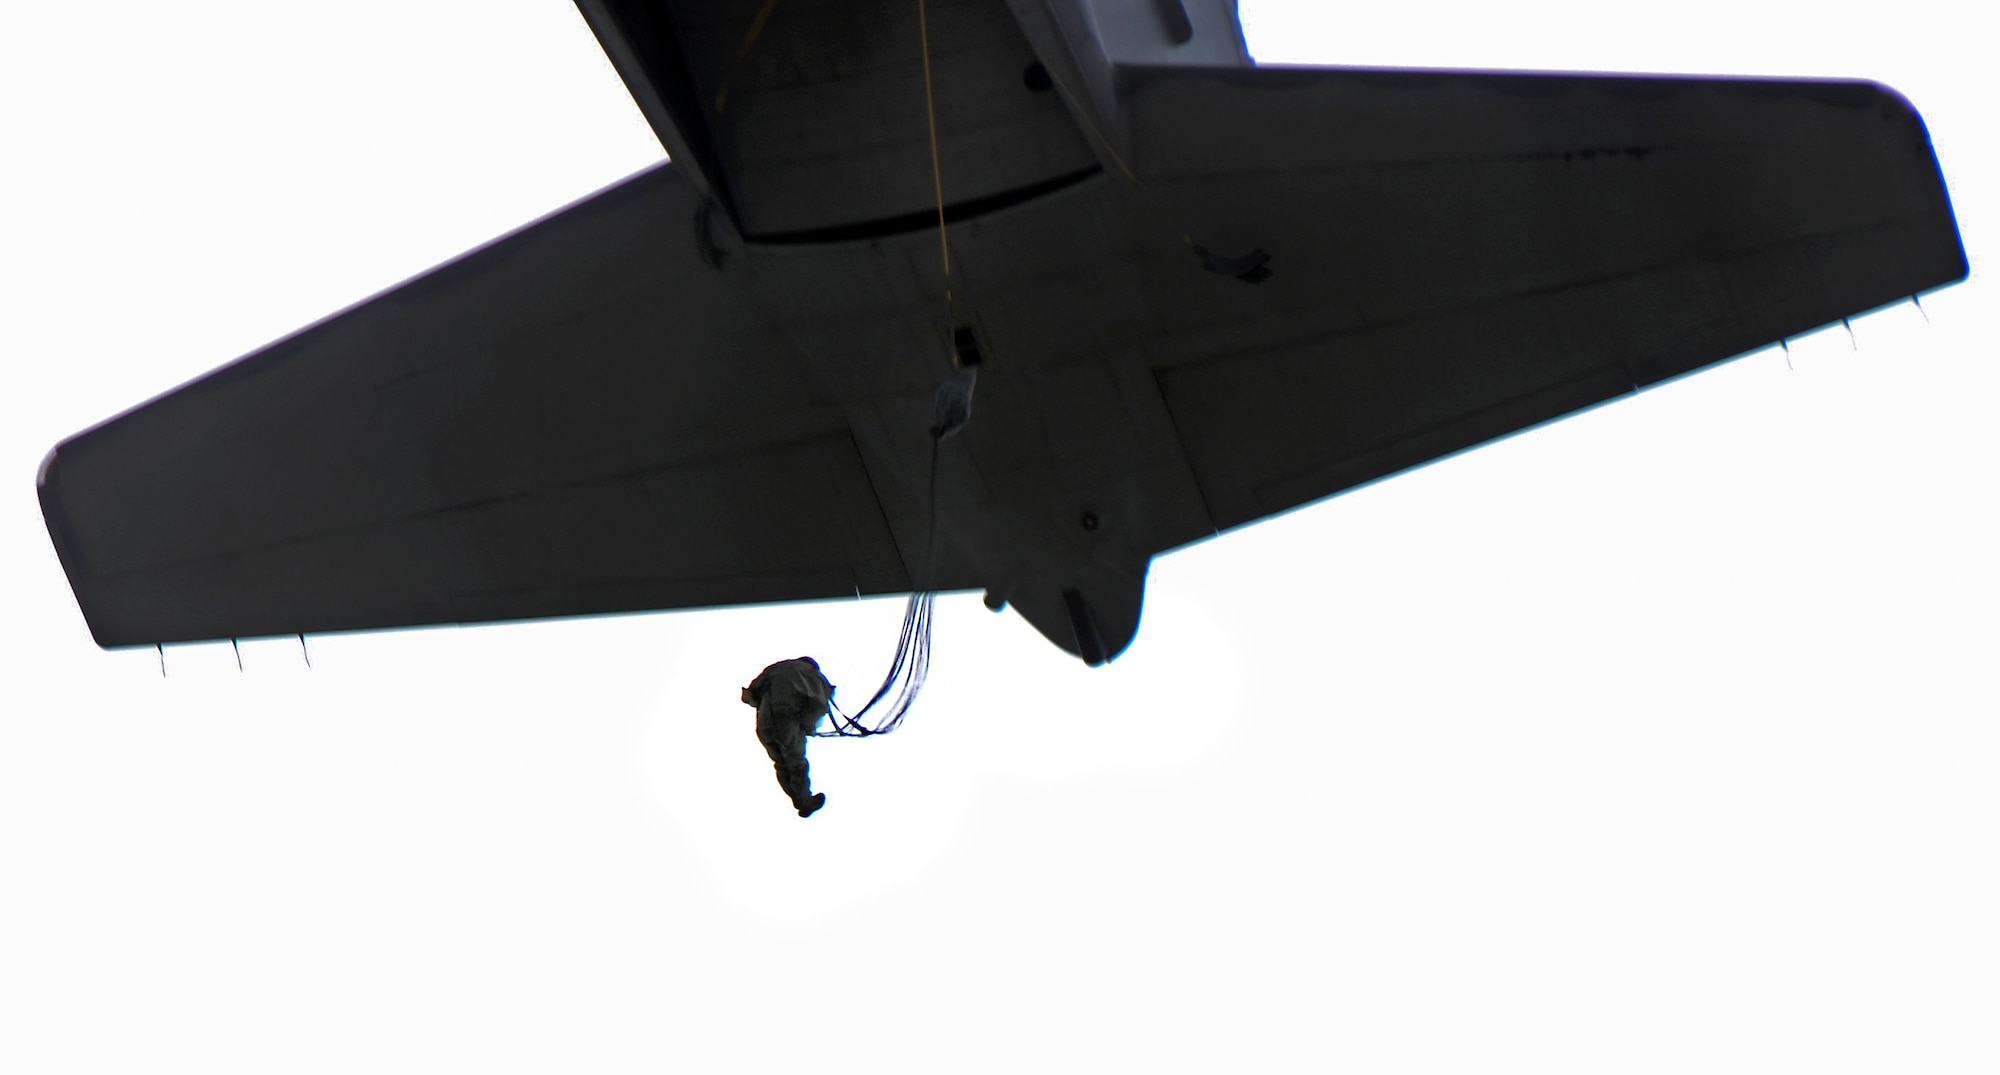 A member of the 736th Security Forces Squadron jump from a C-130 Hercules Aug. 21, 2013, during a static line jump training over Andersen Air Force Base, Guam. As the integrated force protection element of the 36th Contingency Response Group, members of the 736th SFS provide a quick-response airborne capability that serves as an advance echelon team for contingency and humanitarian missions all over the Asia-Pacific region. (U.S. Air Force photo by Airman 1st Class Marianique Santos/Released)